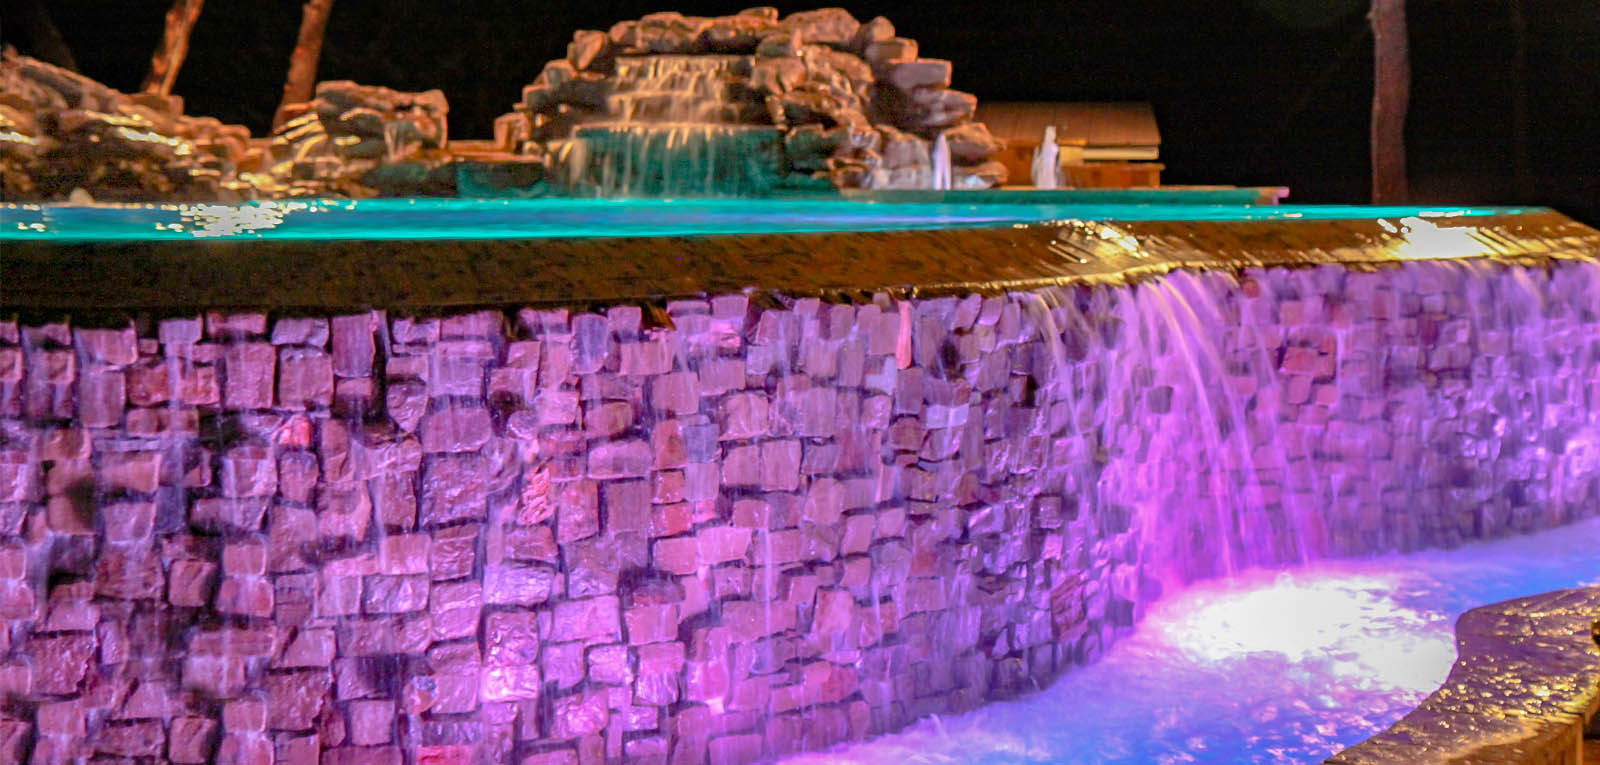 Inground pool with purple and blue LED lighting